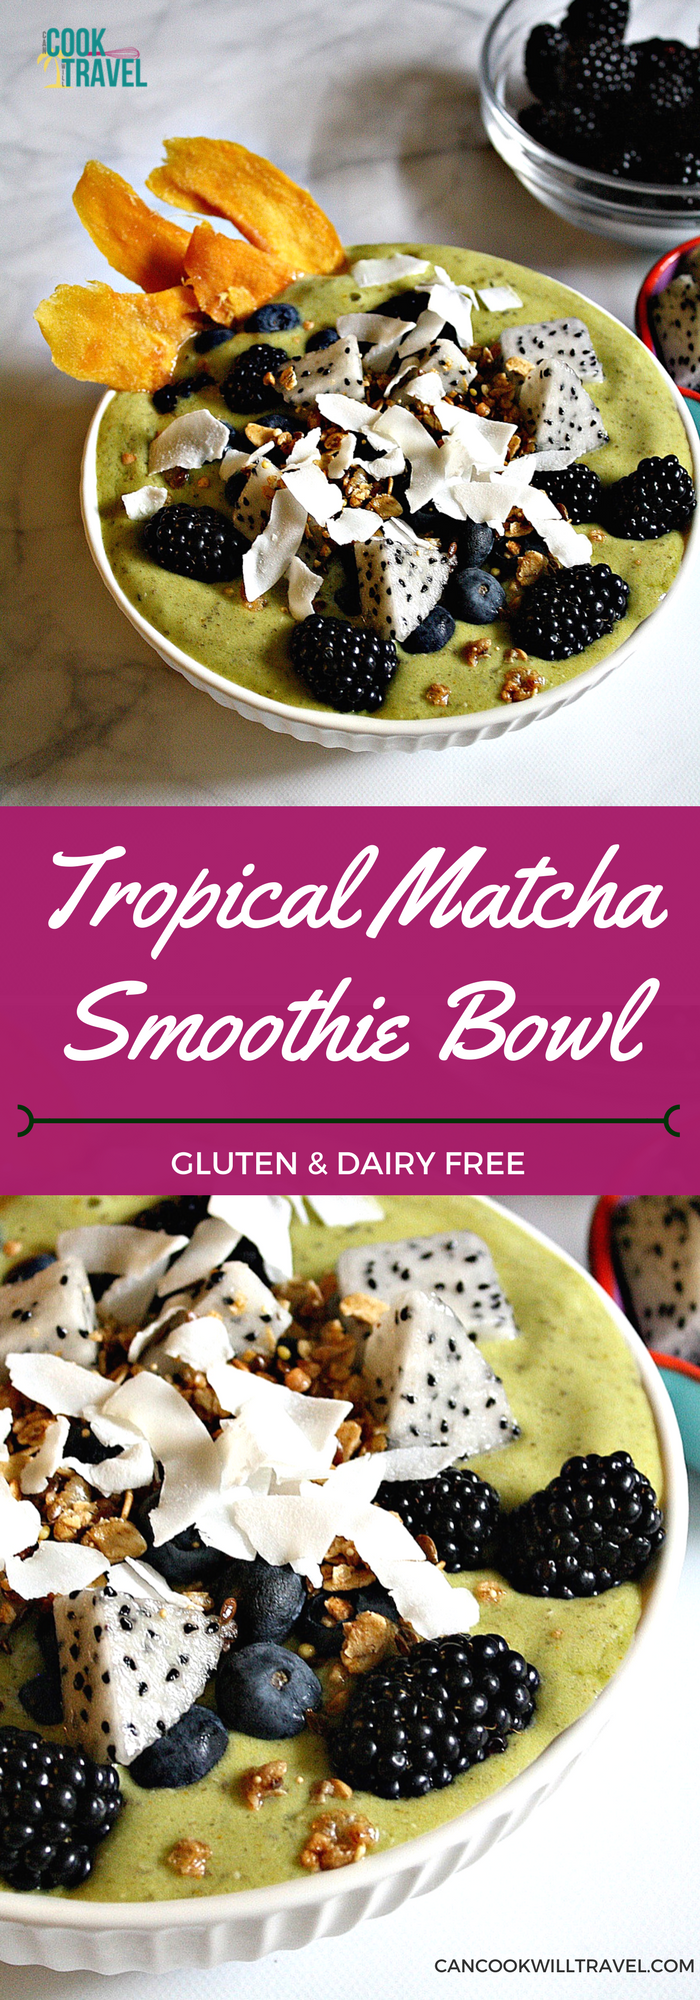 Tropical Matcha Smoothie Bowl_Collage1